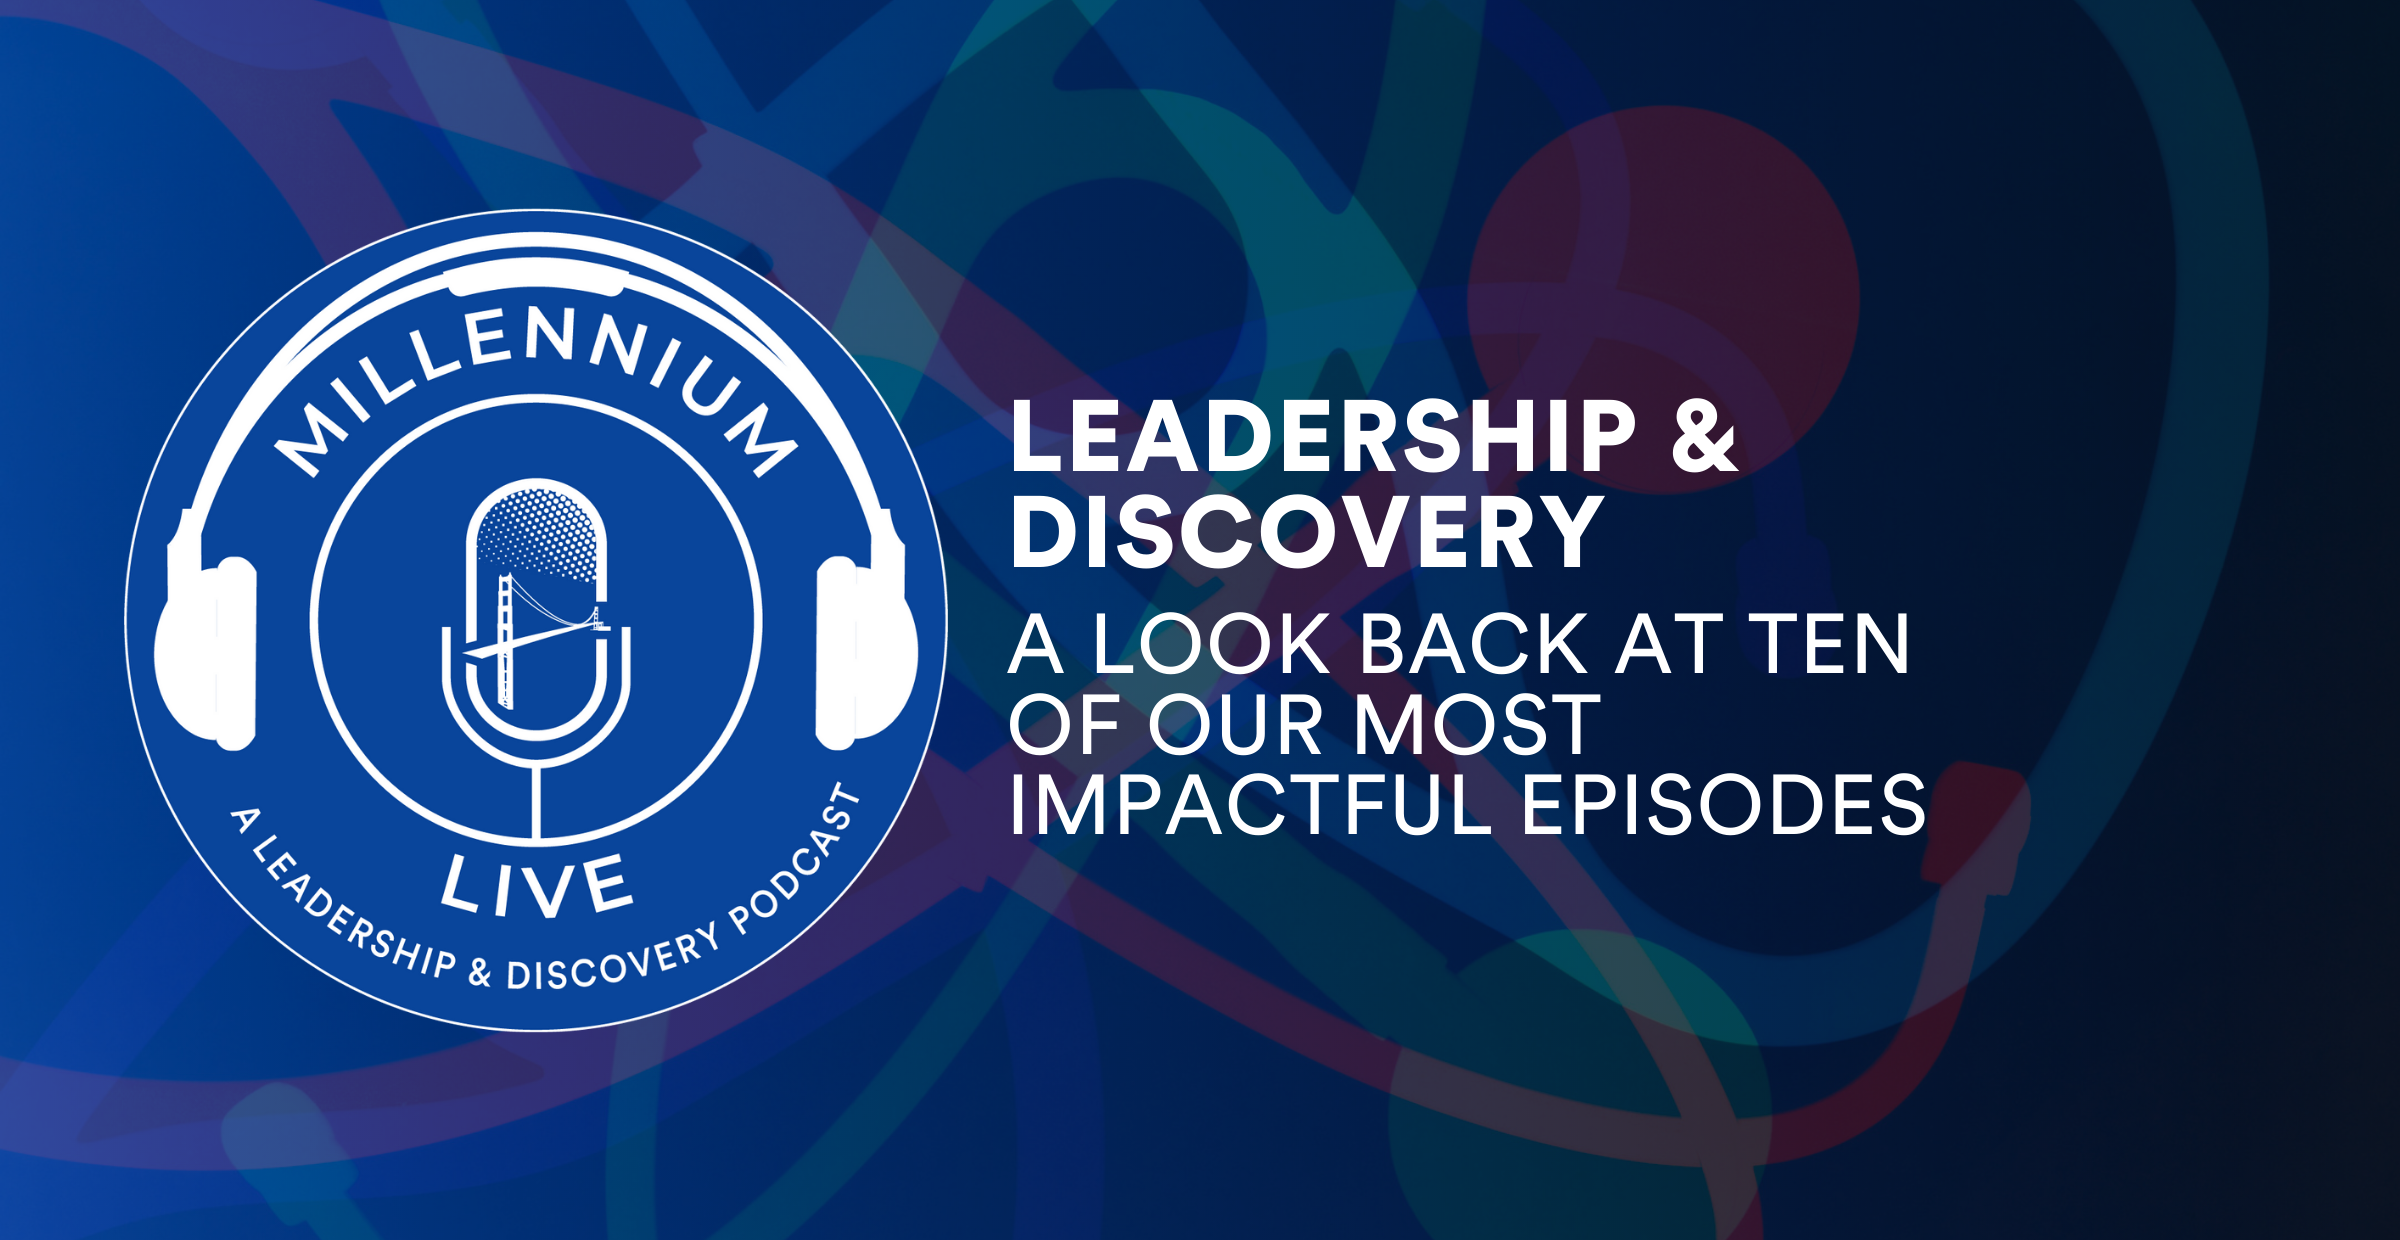 #MillenniumLive on Leadership, Discovery, & Some of Our Most Distinguished Guests